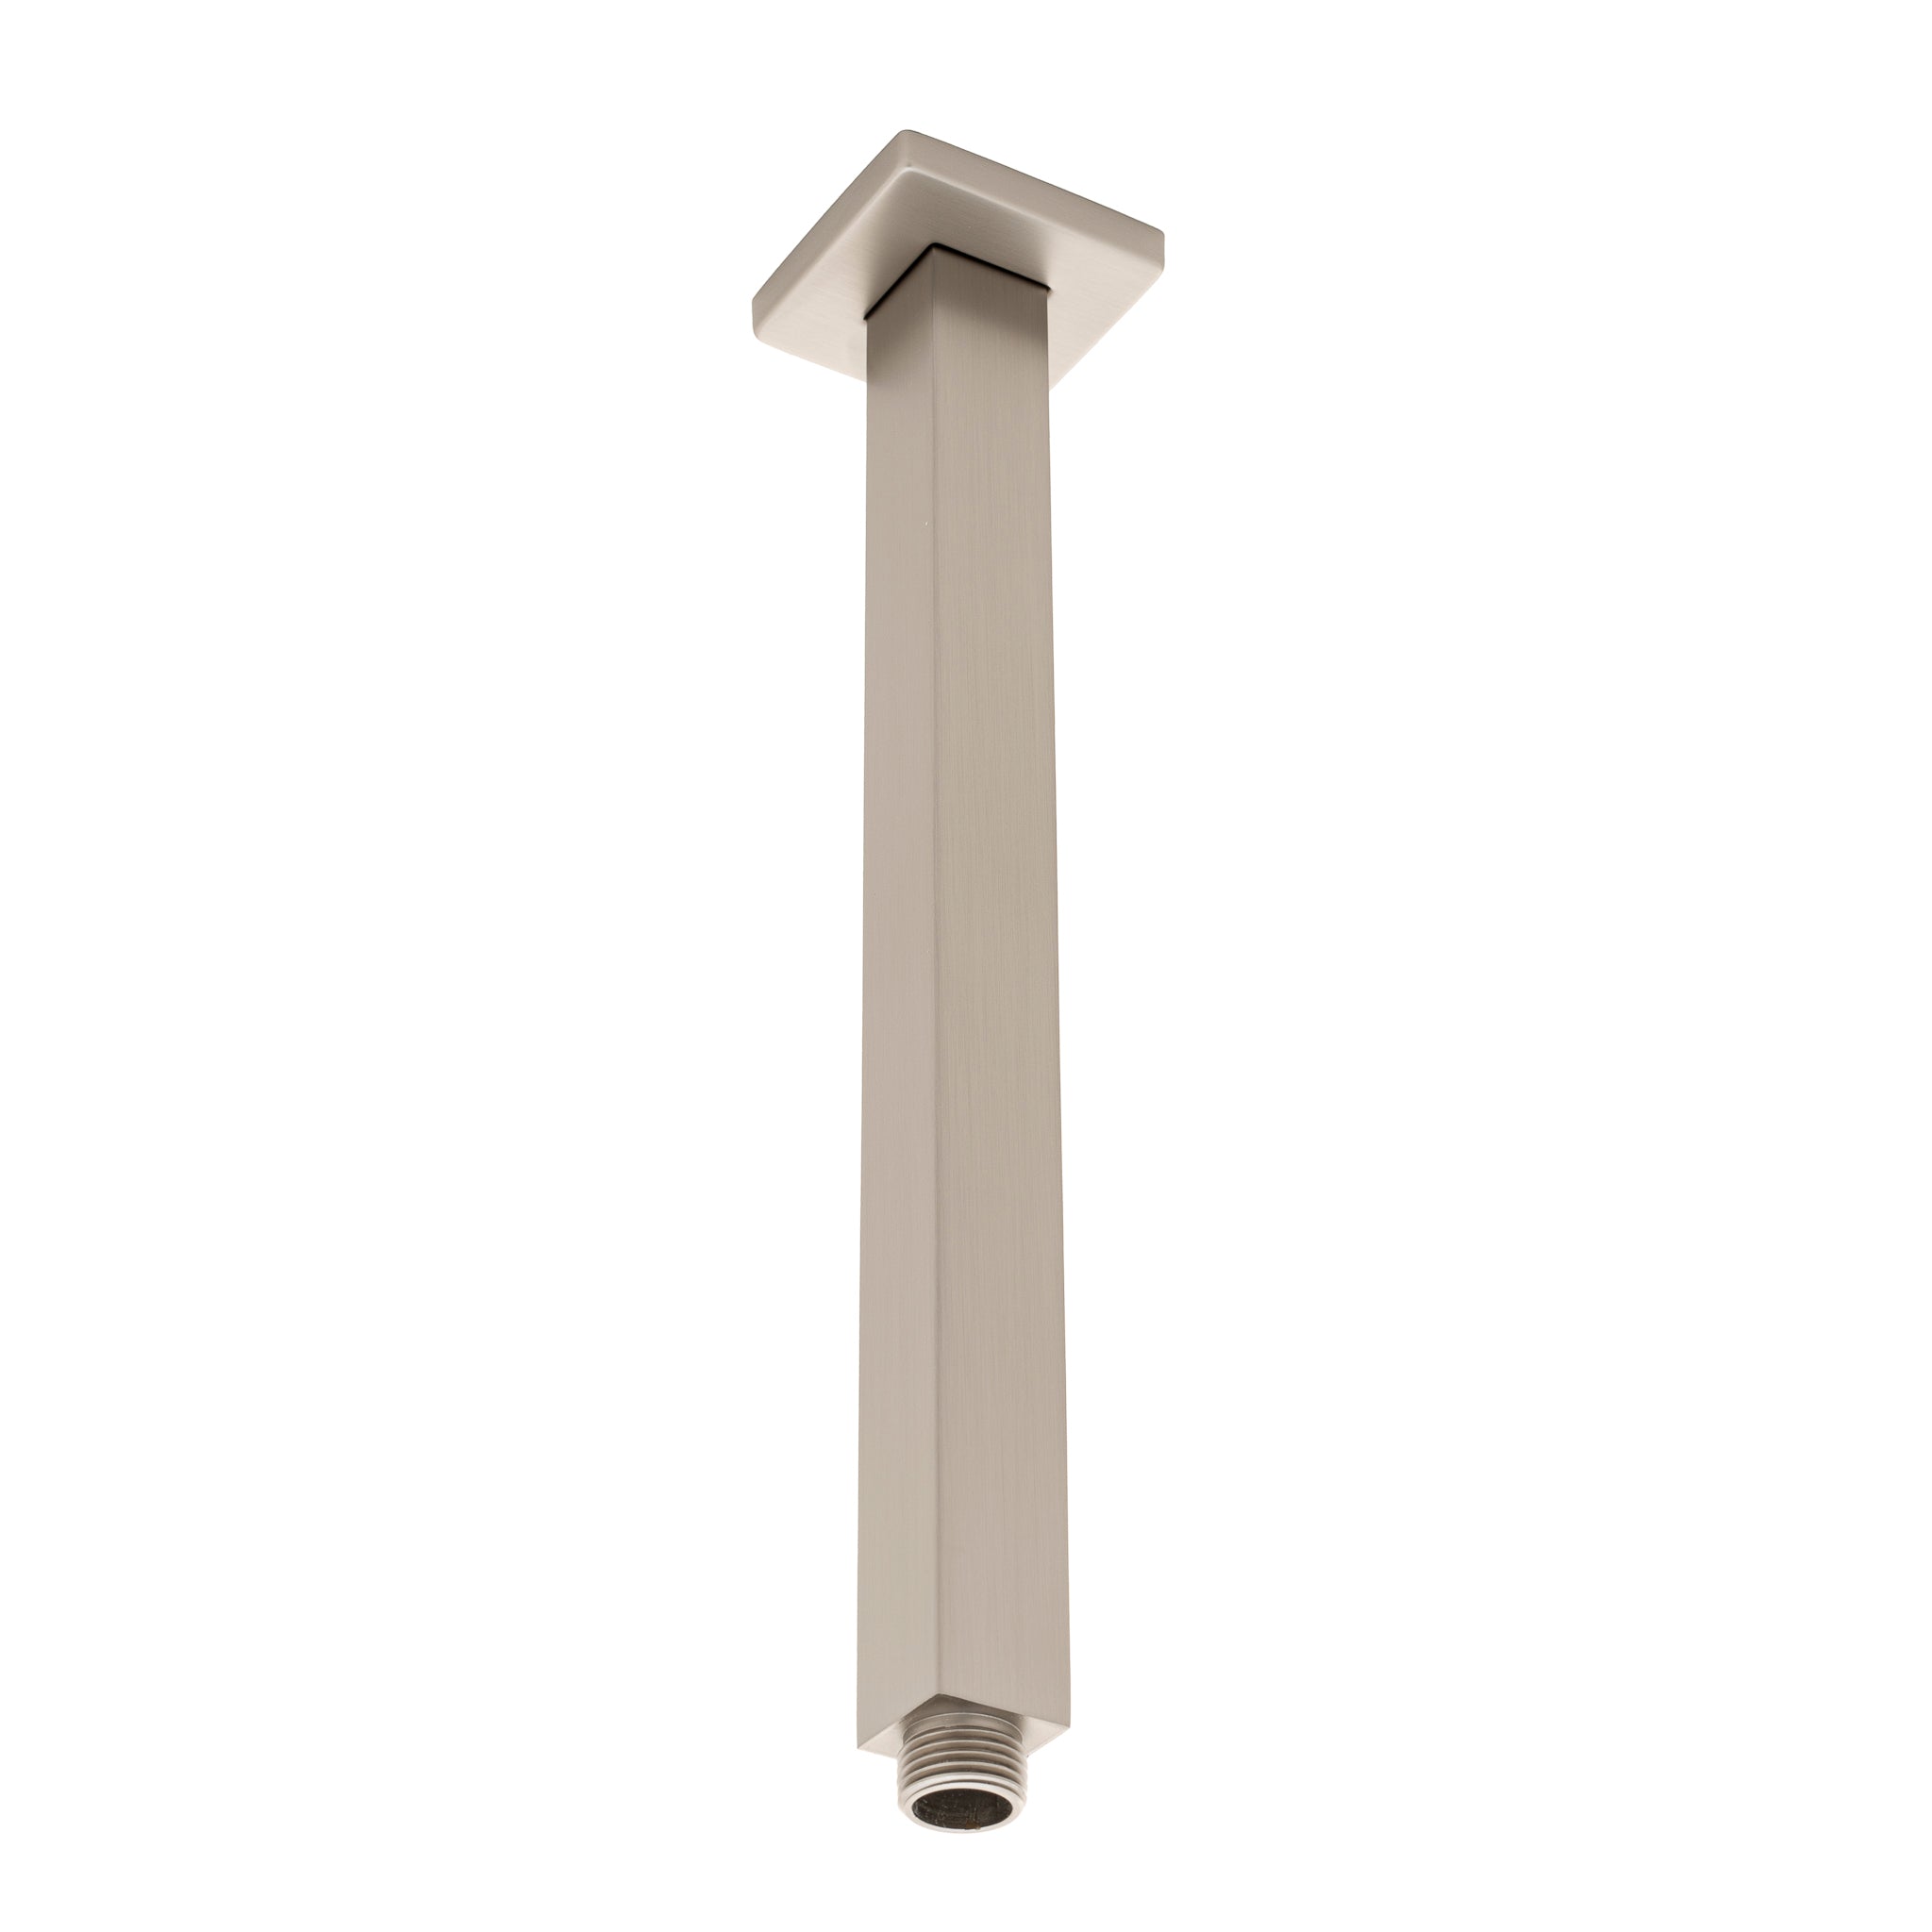 Square 300mm Shower Ceiling Dropper Arm, Brushed Nickel